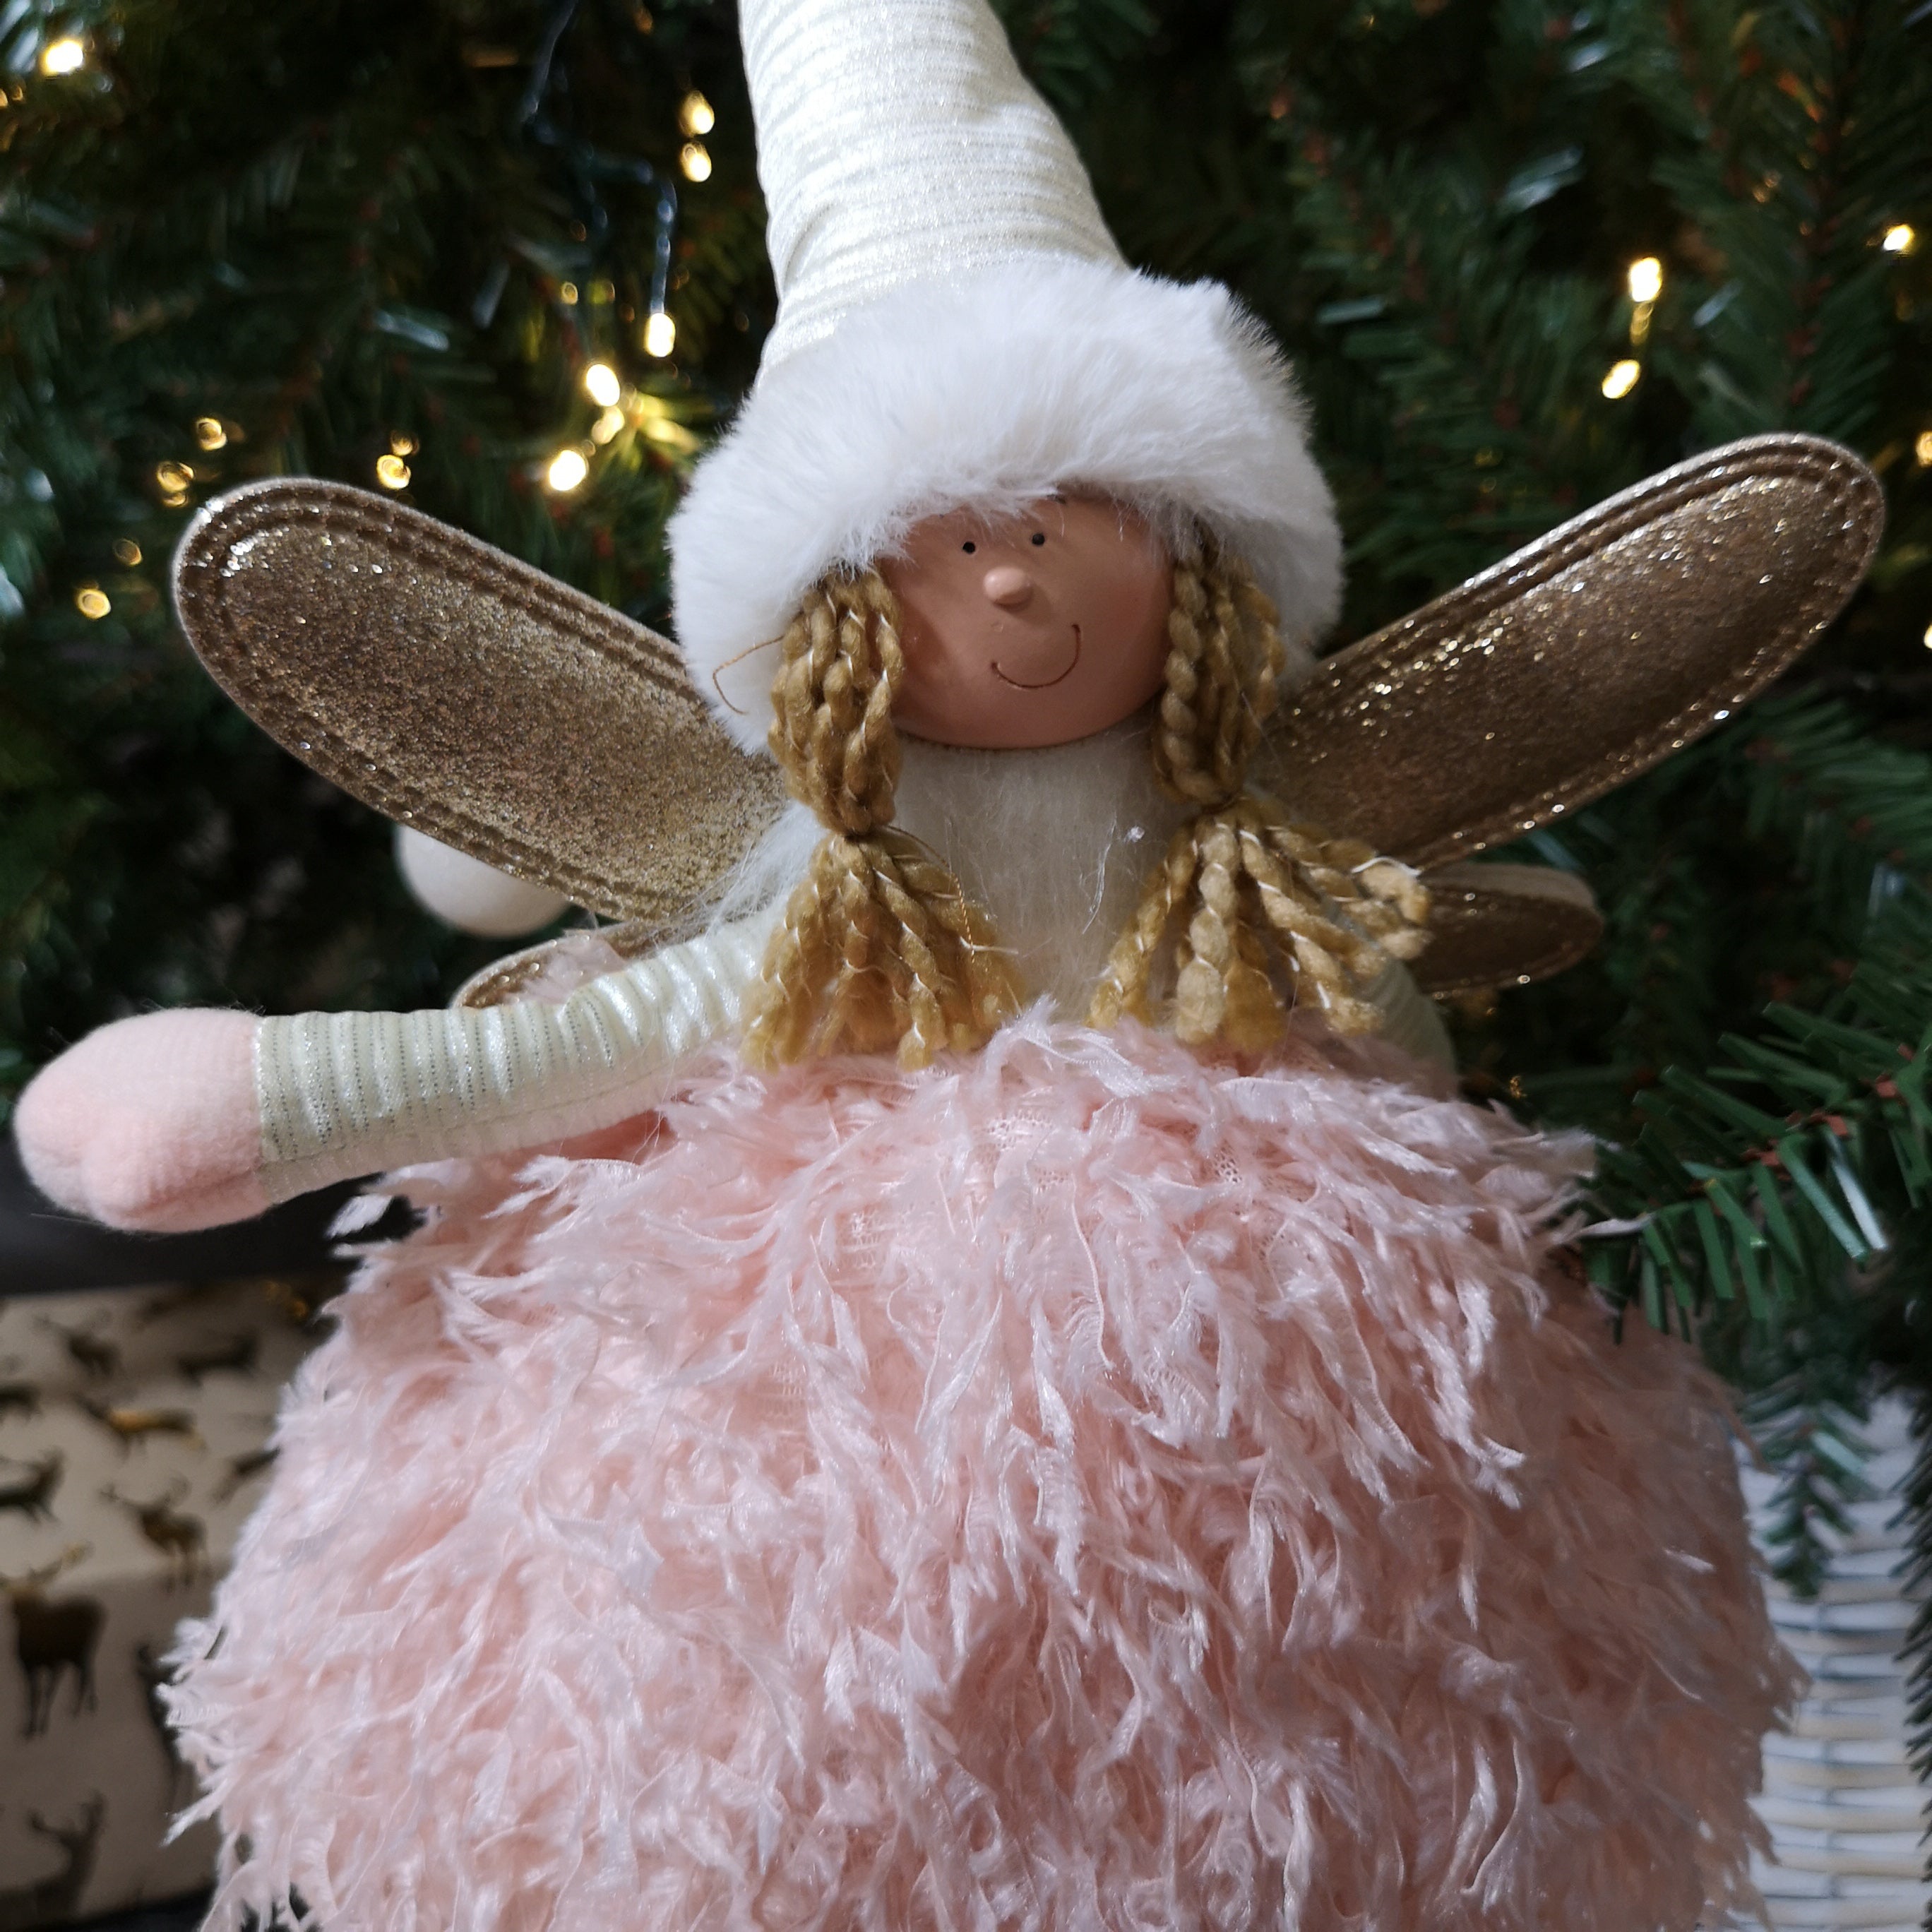 45cm Premier Christmas Standing Angel Decoration with Feather Skirt in Pink & Gold